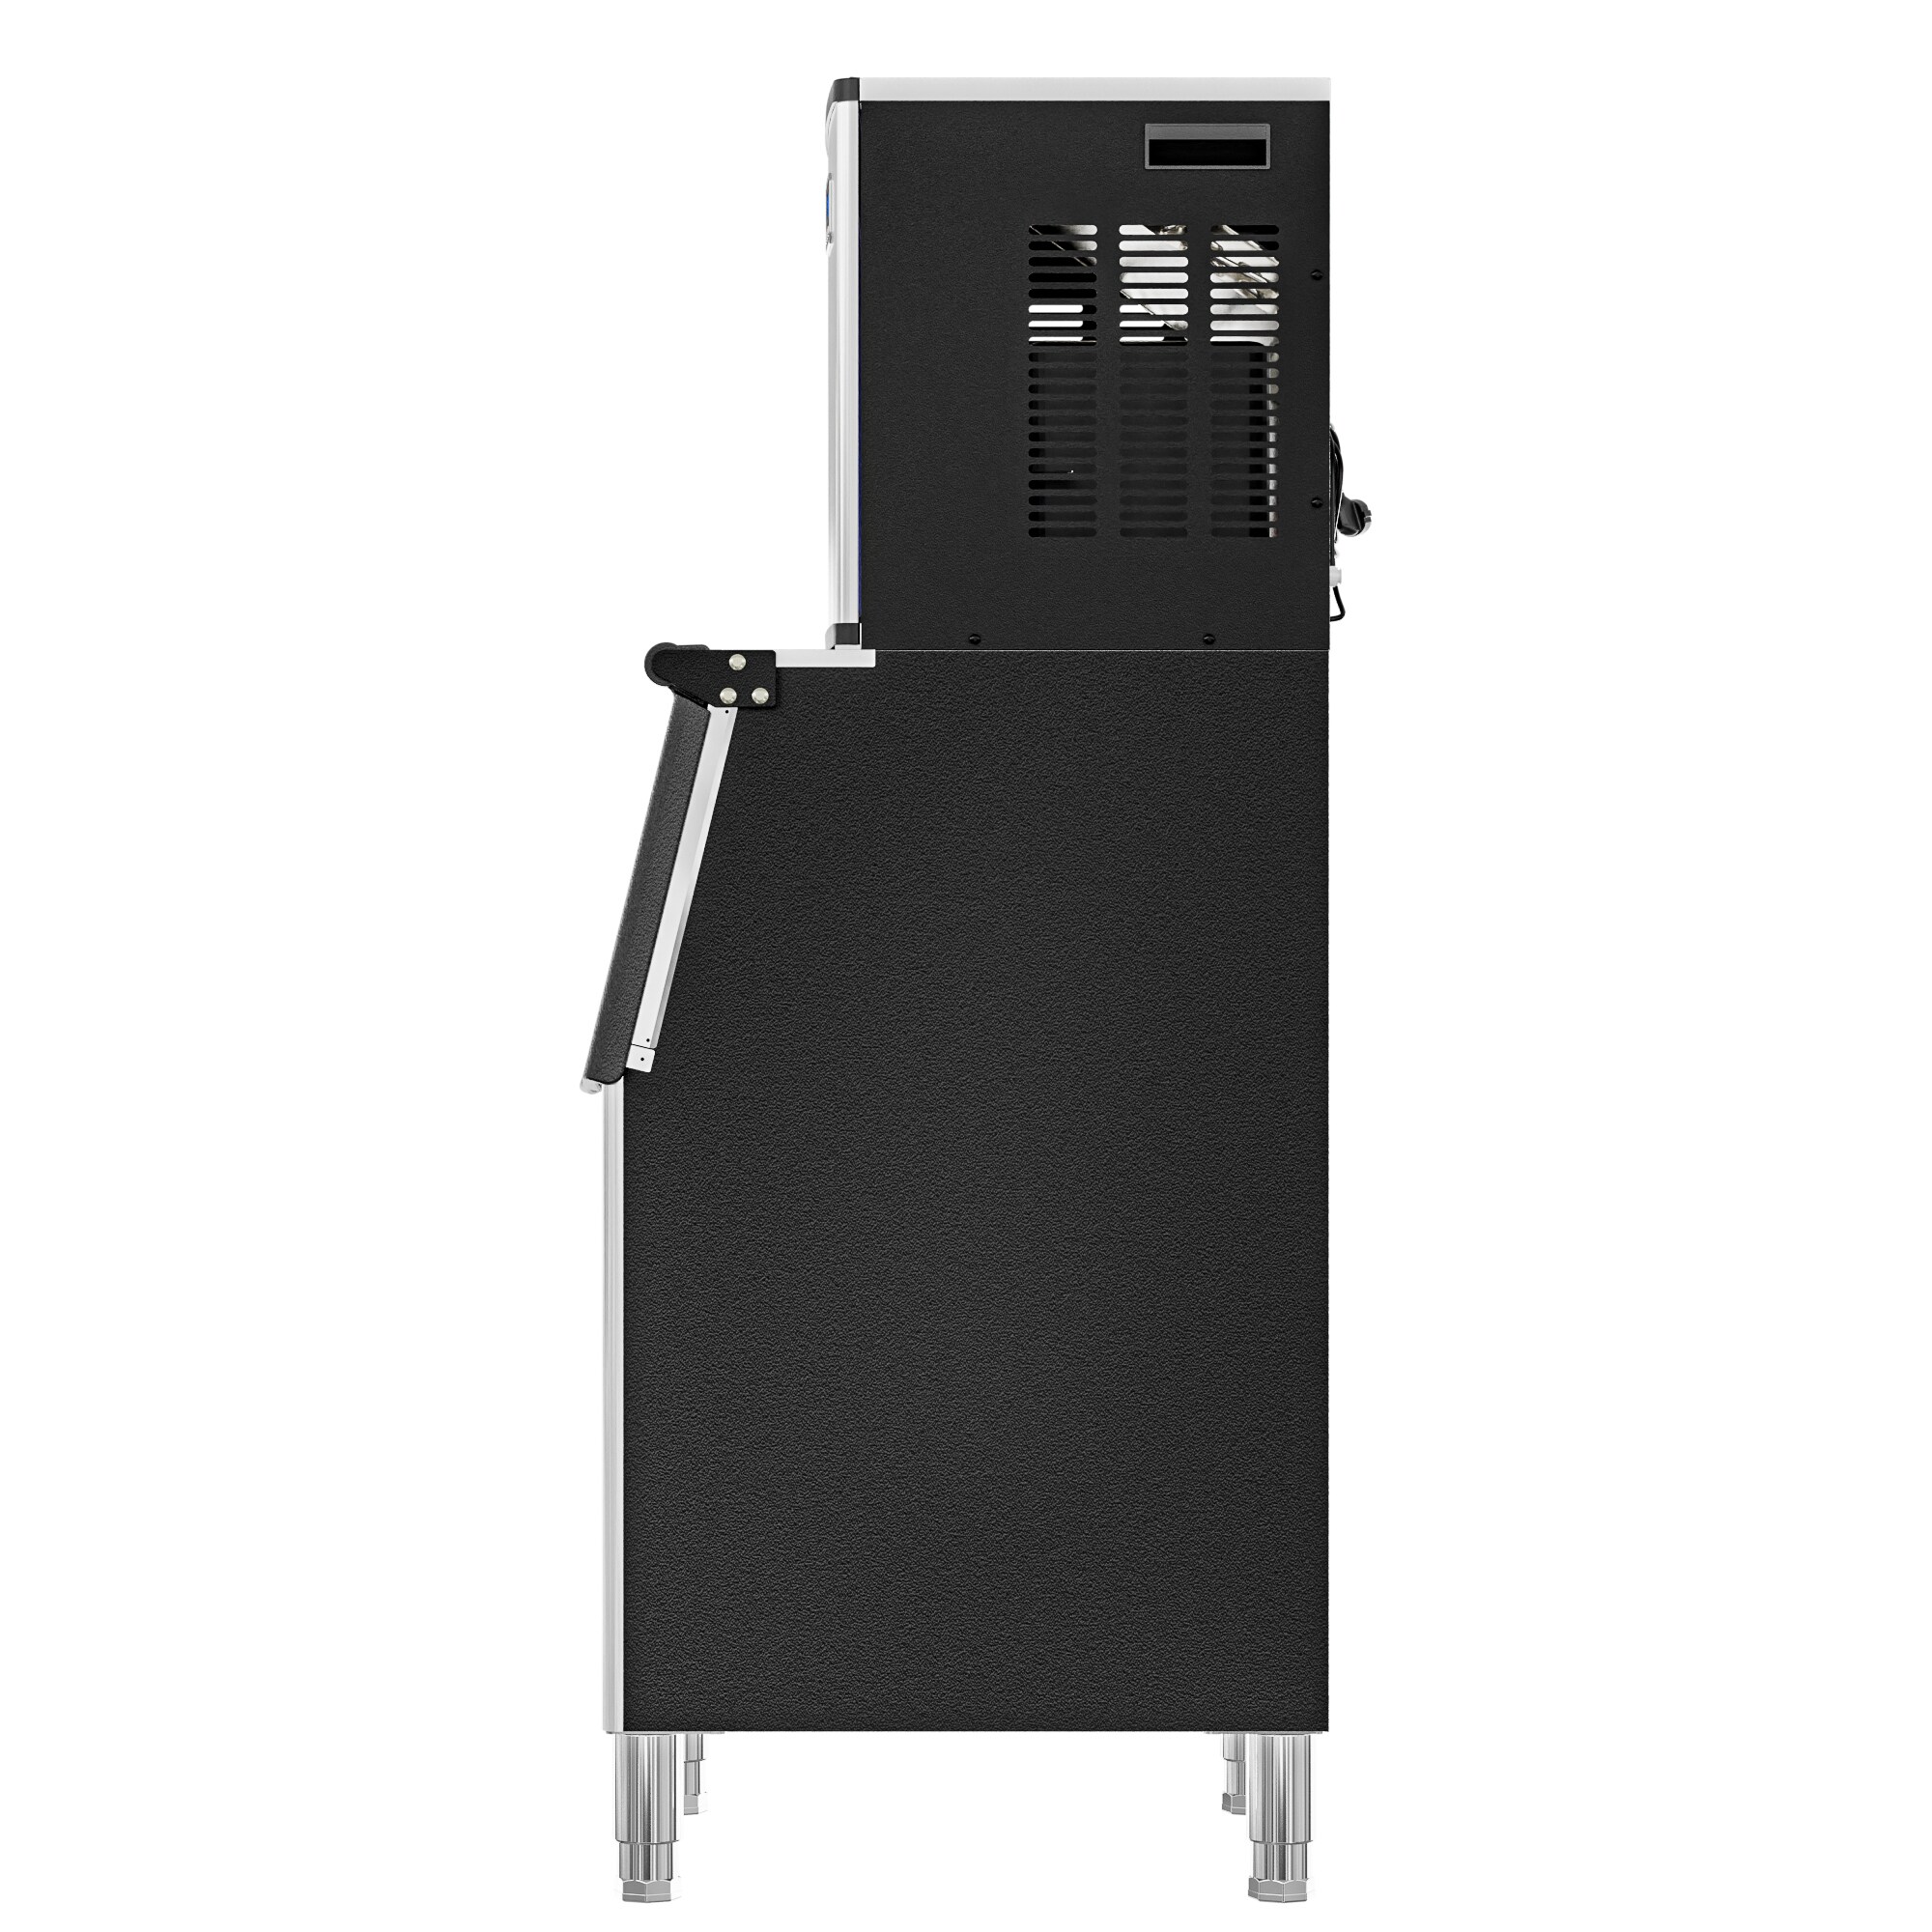 BLAKESLEE 30-Racks per Hour Stainless Undercounter Commercial Dishwasher